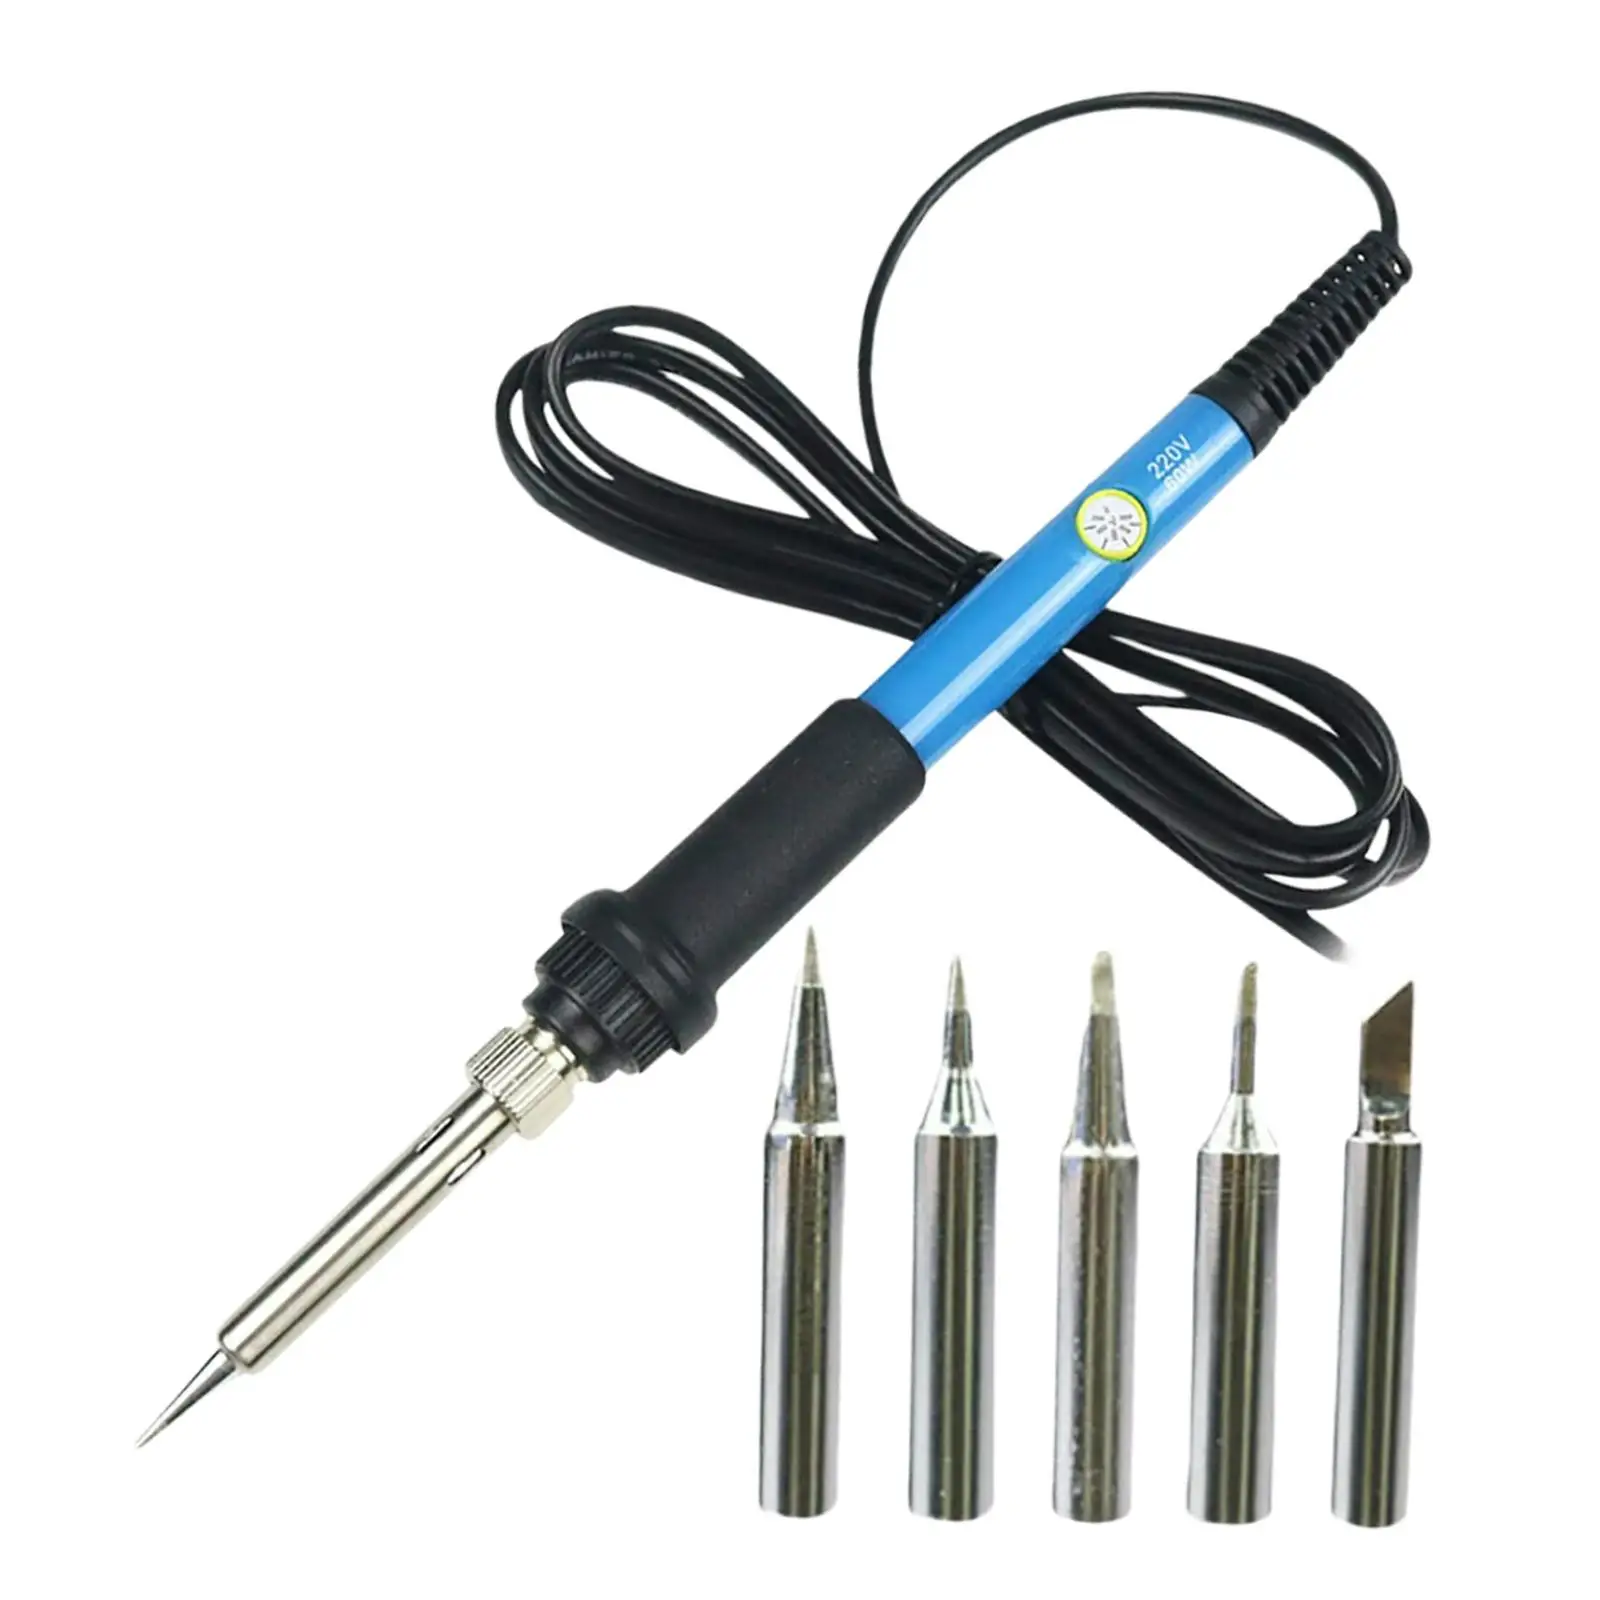 Upgraded Temperature Soldering Iron Set Pen Electric Soldering Iron Kit for Home DIY